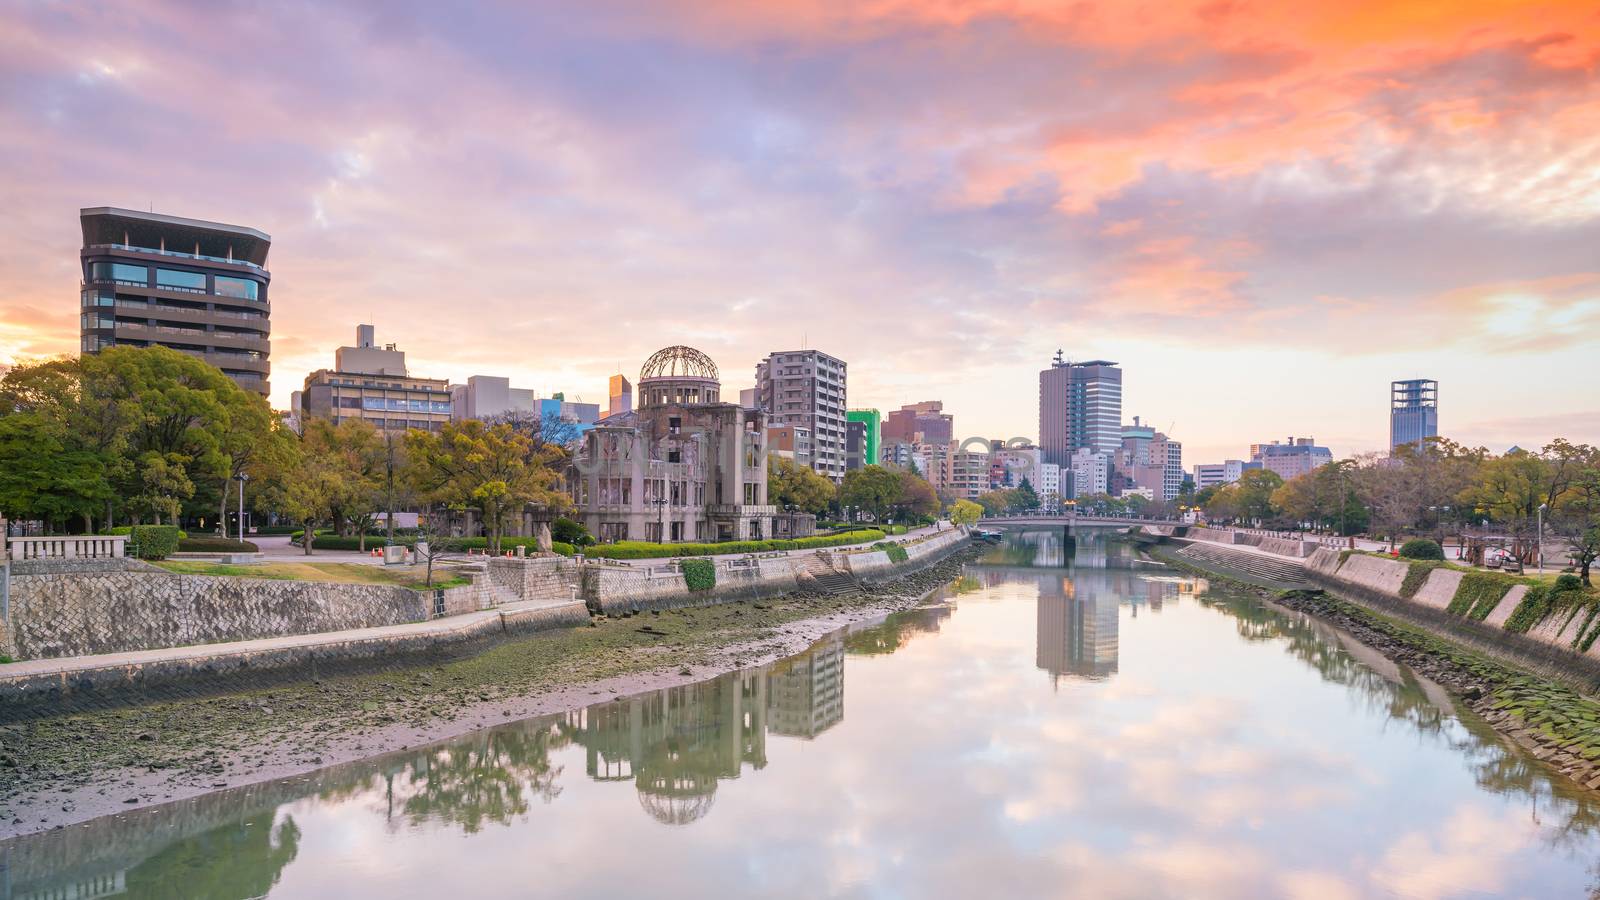 Hiroshima Peace Memorial Park with Atomic Bomb Dome in Hiroshima by f11photo